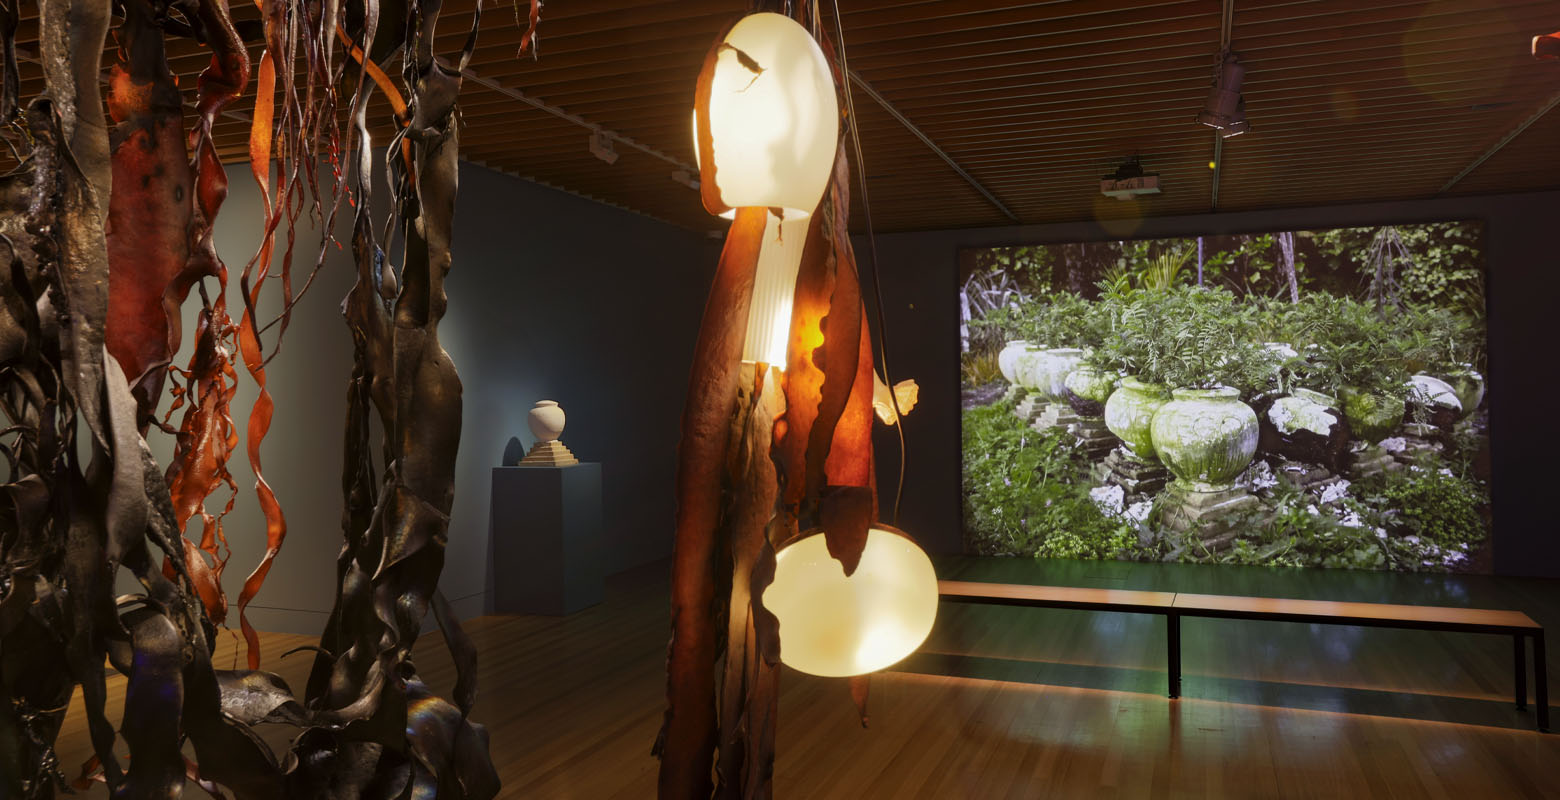 View of a gallery space. It is dimly lit. In the foreground hangs large pieces of kelp lit by a rainbow of neon lighting. In the background, projected onto the wall, is a video work comprising of many ceramic pots housing plants the are outgrowing them